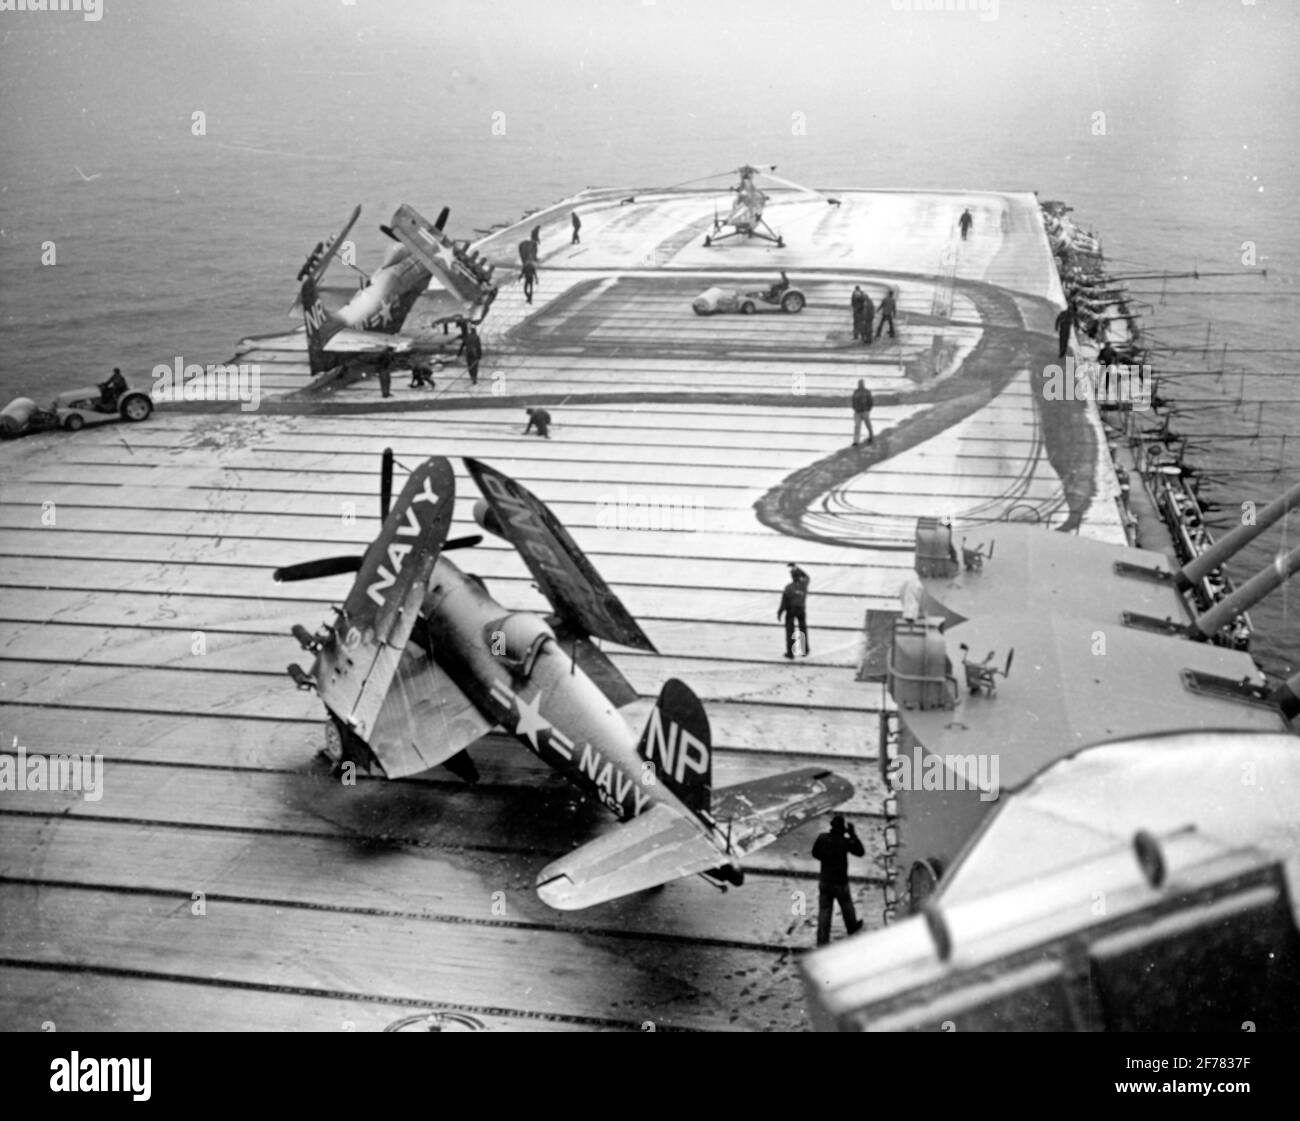 USS Valley Forge (CV-45) Crewmen use flight deck tractors with power brooms to sweep snow from the carrier's flight deck, during operations off Korea, circa early 1951. Photo is dated 8 May 1951, but Valley Forge ended her second Korean War deployment in late March of that year. Plane parked in the foreground is a F4U-4 Corsair fighter. Those on the forward flight deck are an AD Skyraider attack plane and a HO3S helicopter Stock Photo